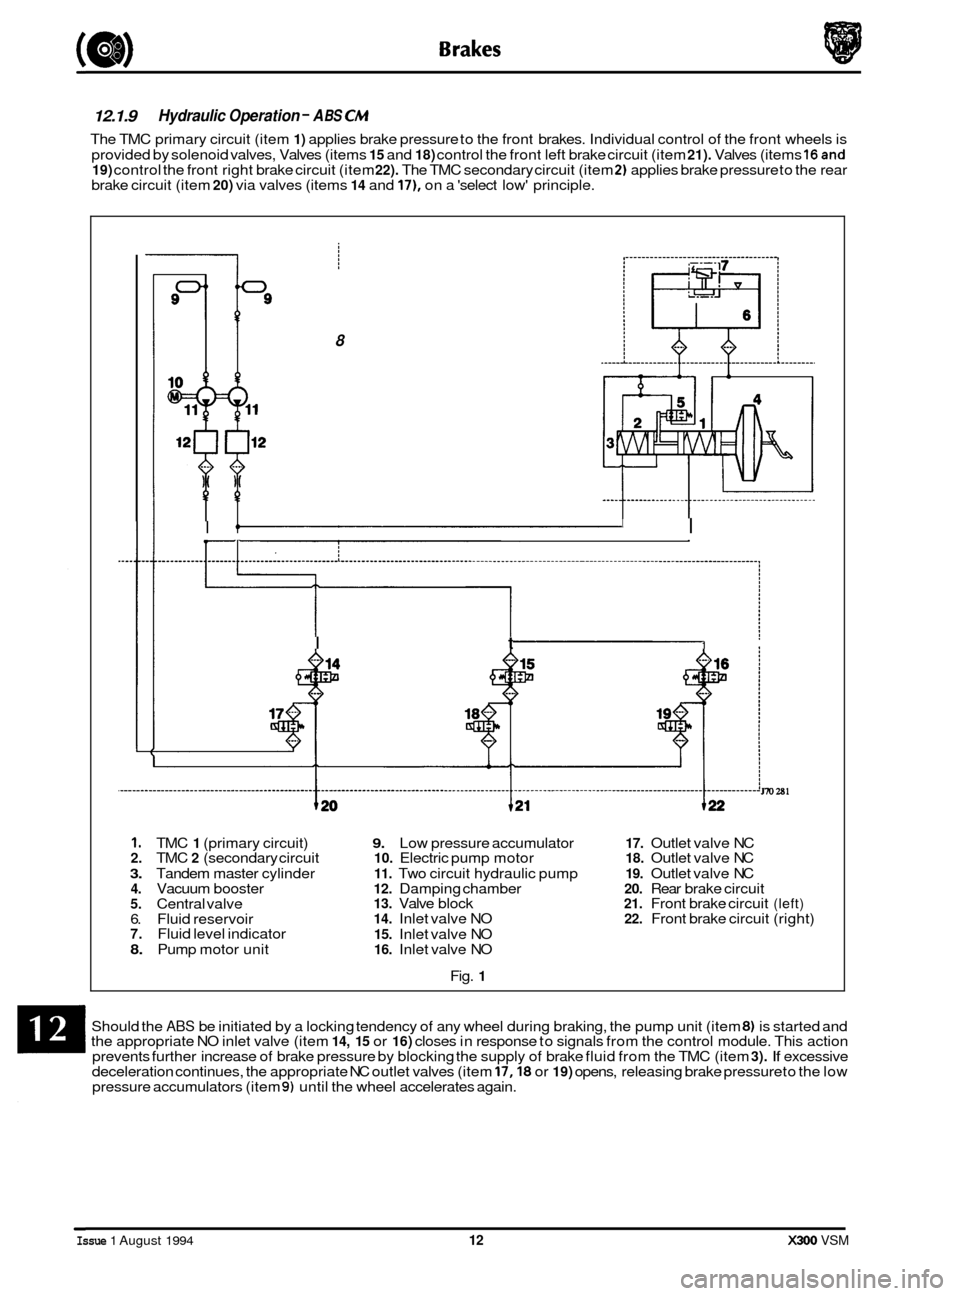 JAGUAR XJ6 1994 2.G User Guide 12.1.9 
The TMC  primary circuit  (item 1) applies brake pressure  to the front  brakes. Individual control of the  front wheels  is 
provided by solenoid  valves, Valves (items 
15 and 18) control th